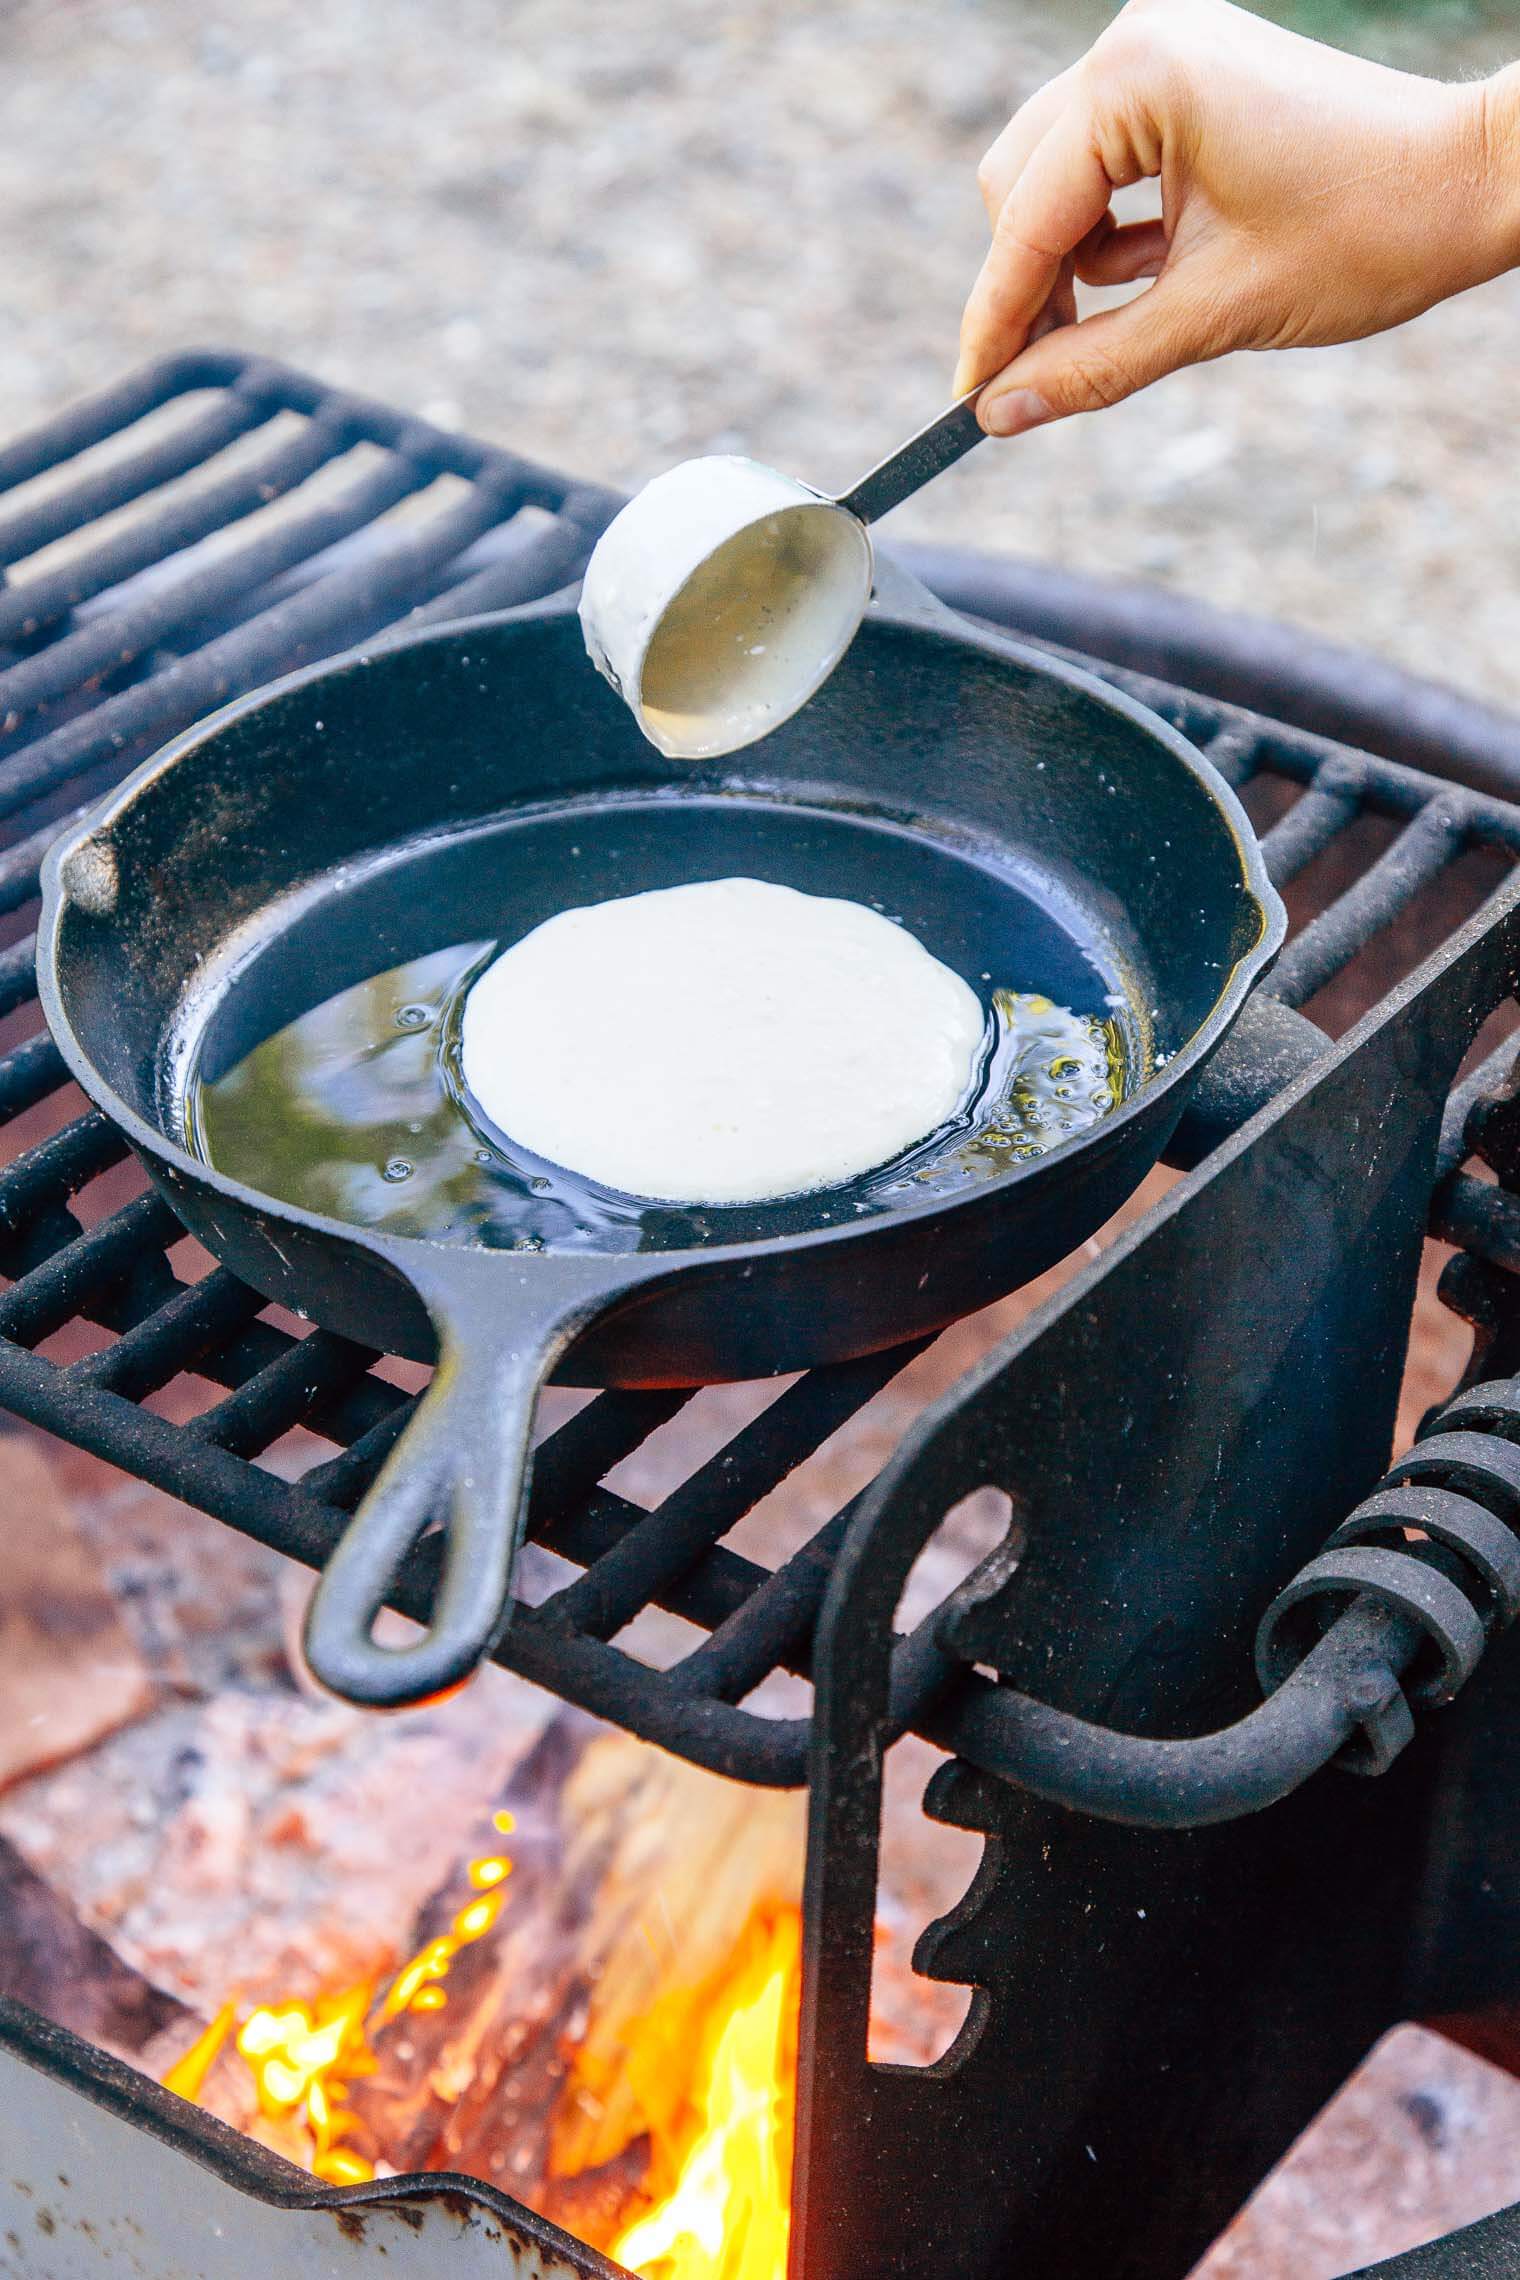 Megan scooping pancake batter into a cast-iron skillet that is over a campfire